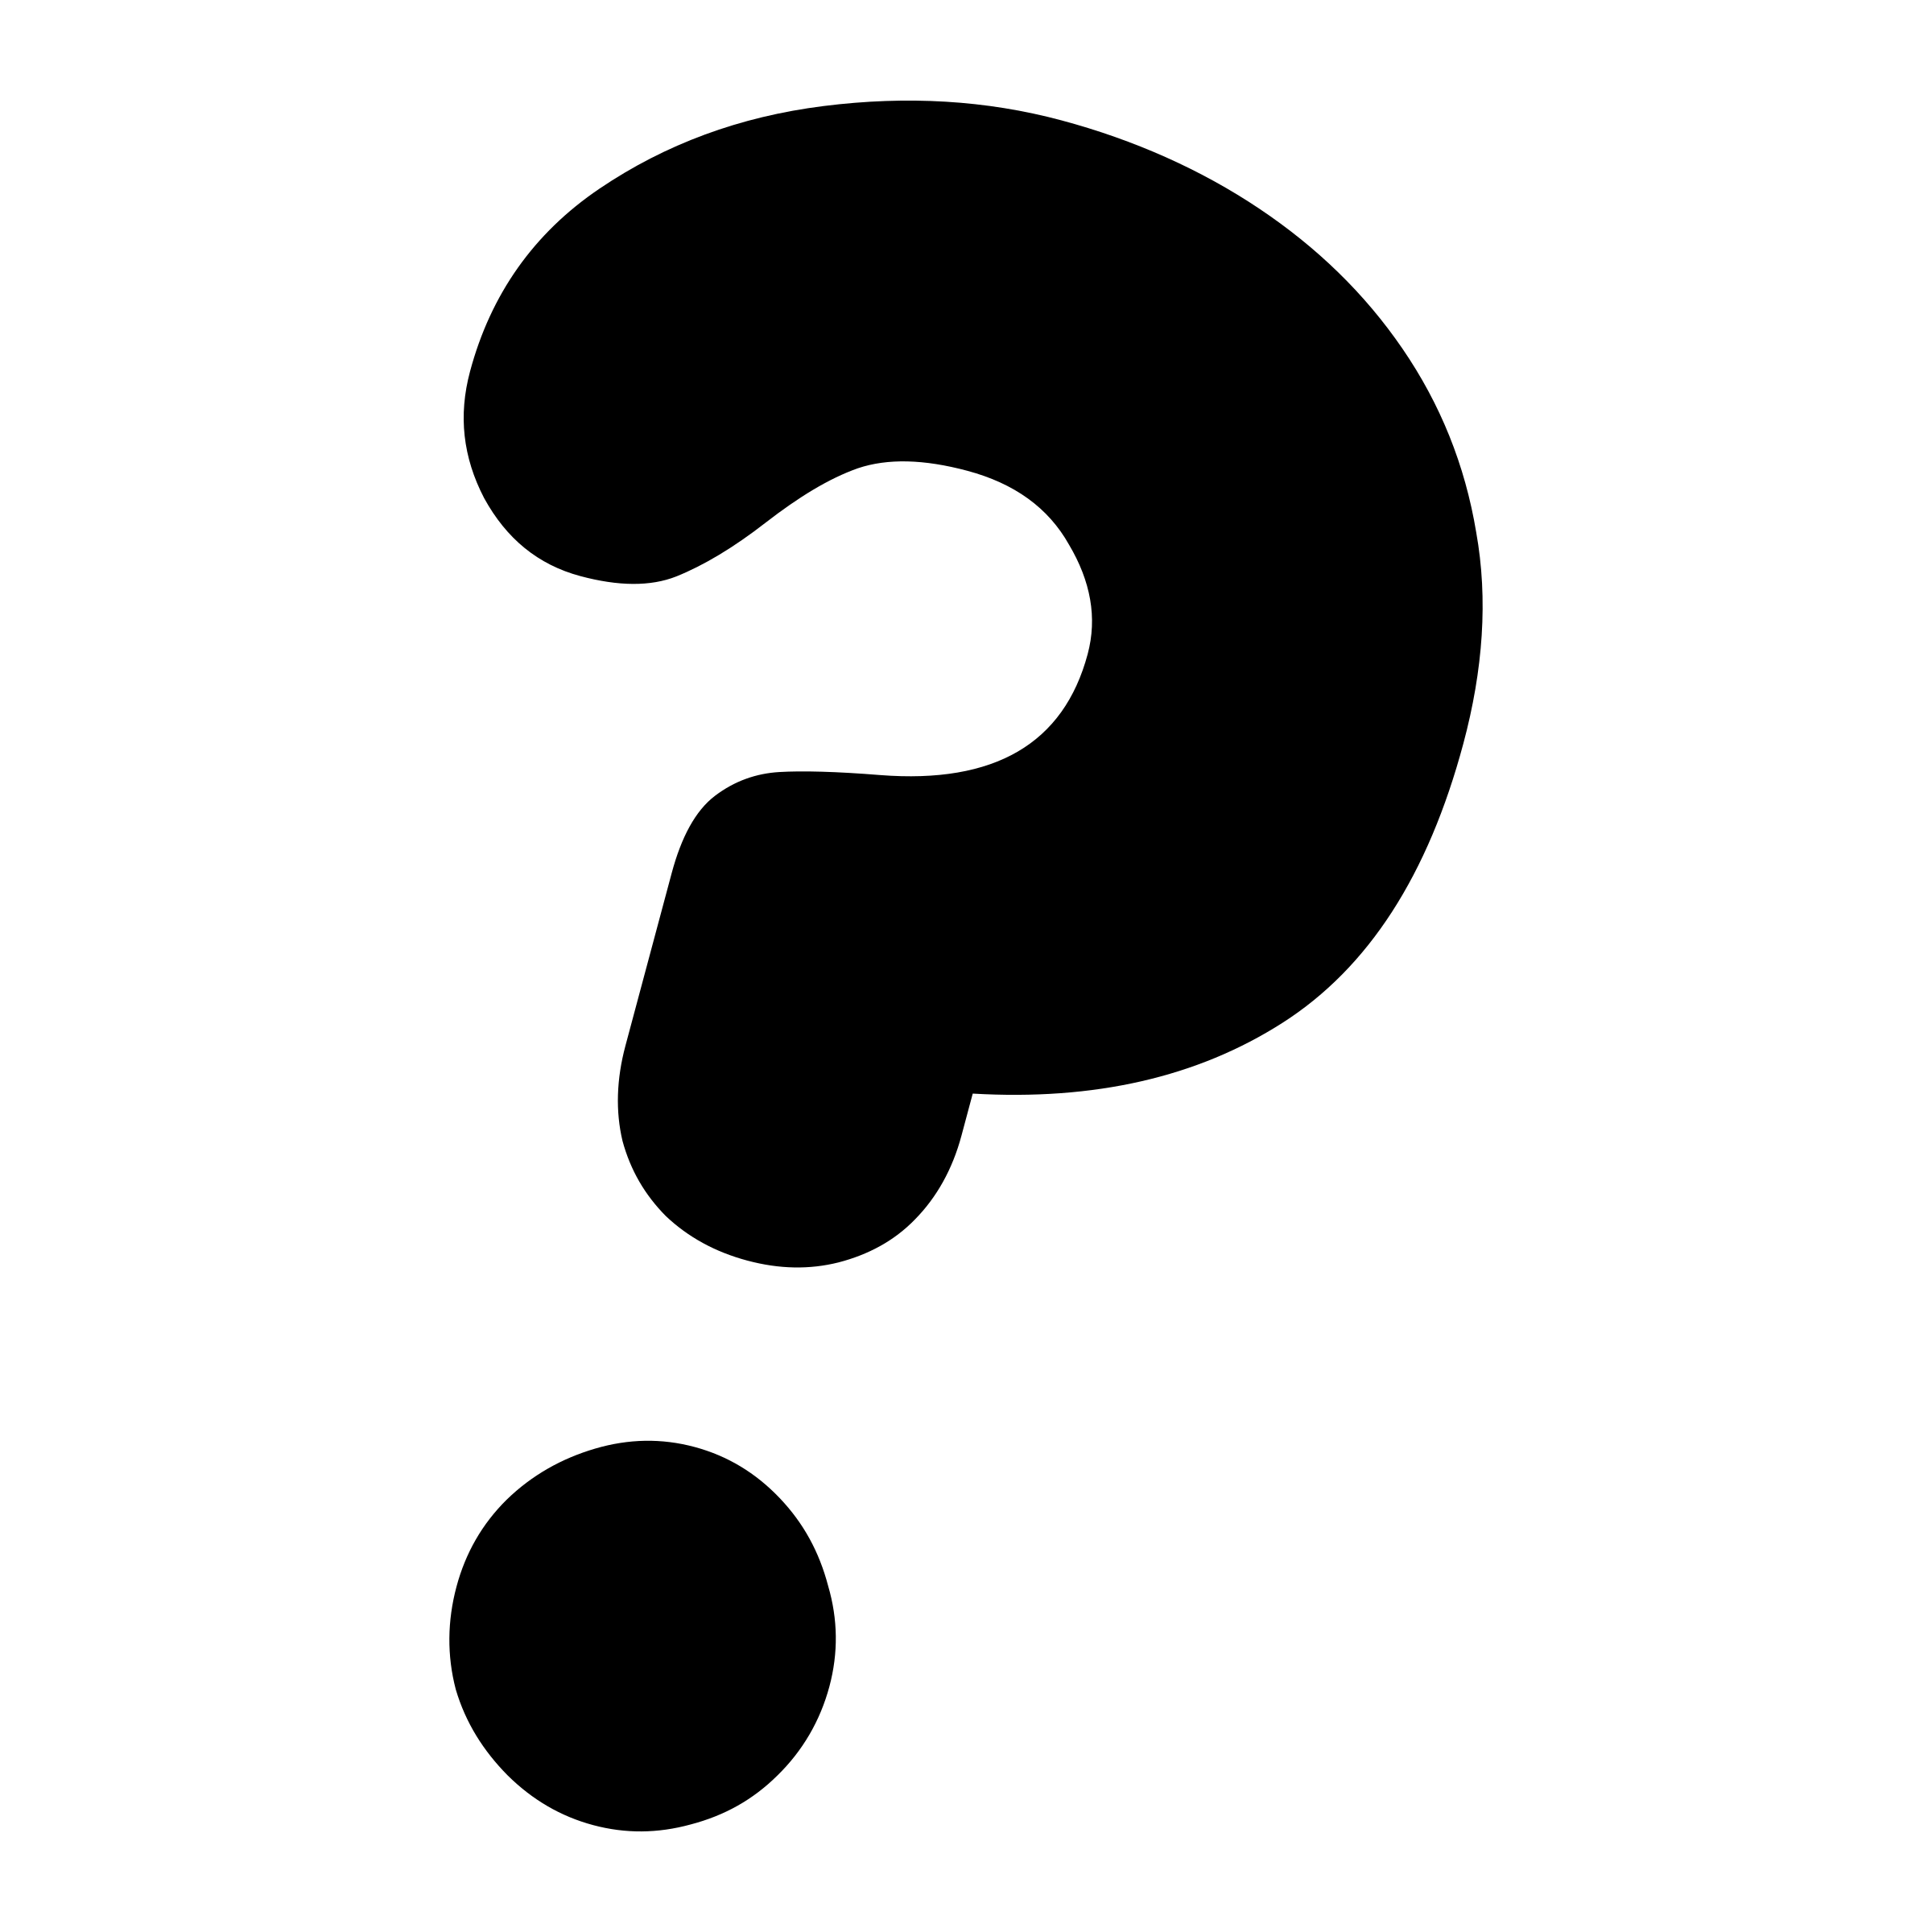 clipart image of question mark - photo #12